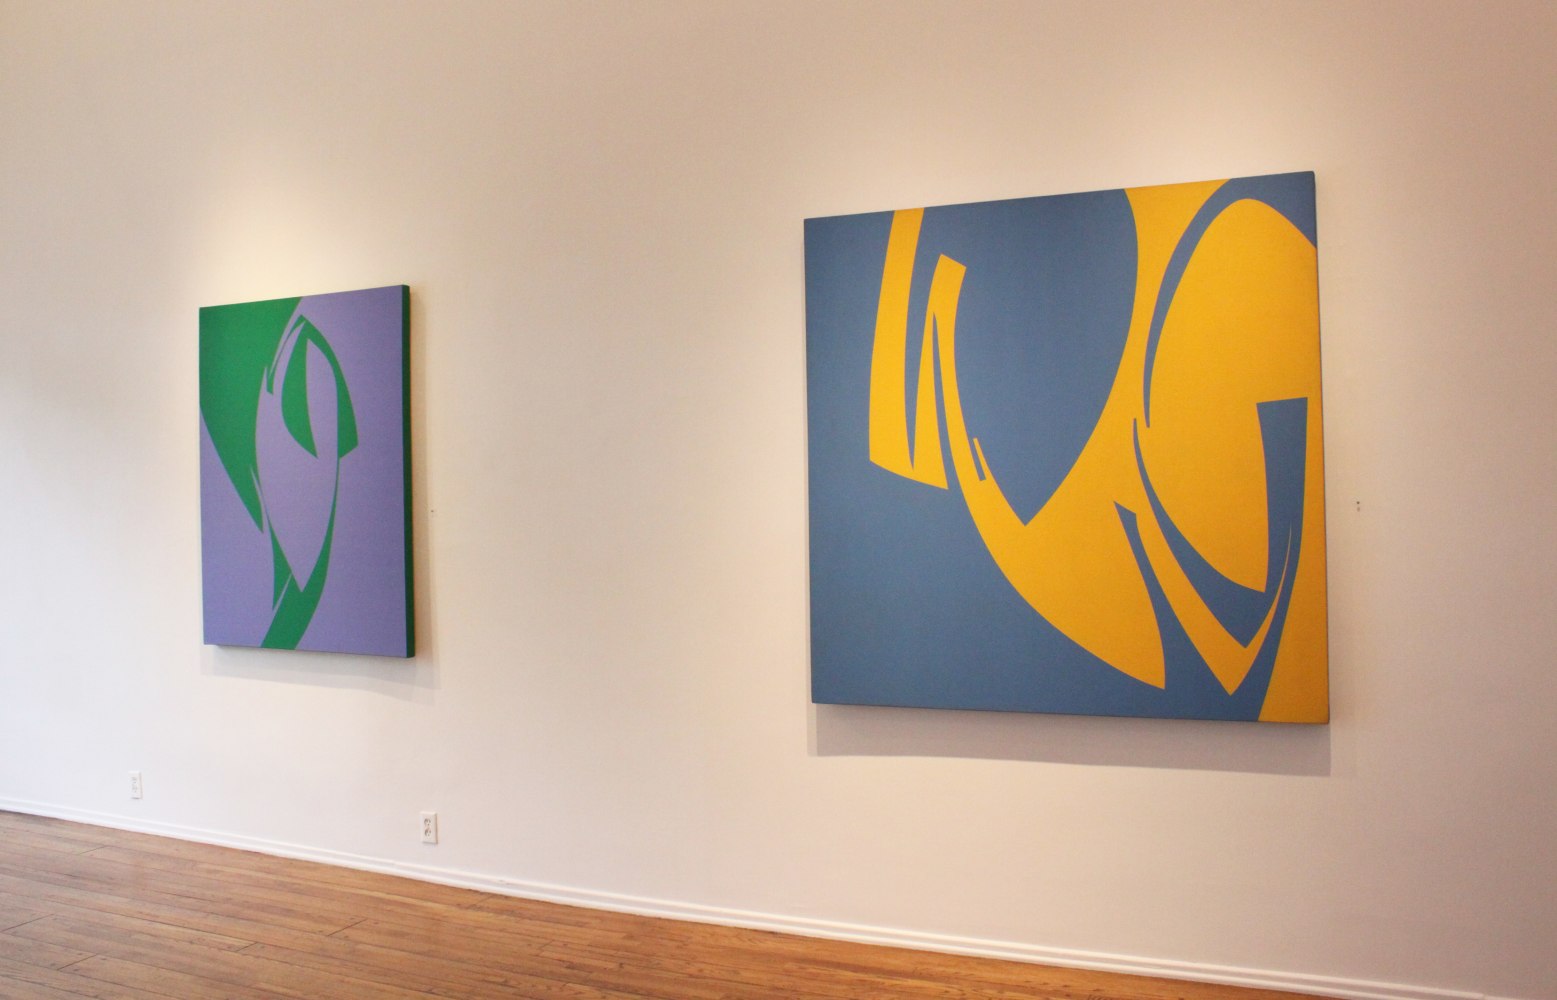 June Harwood: Splinter, Divide and Flow - Paintings from 1967-1977